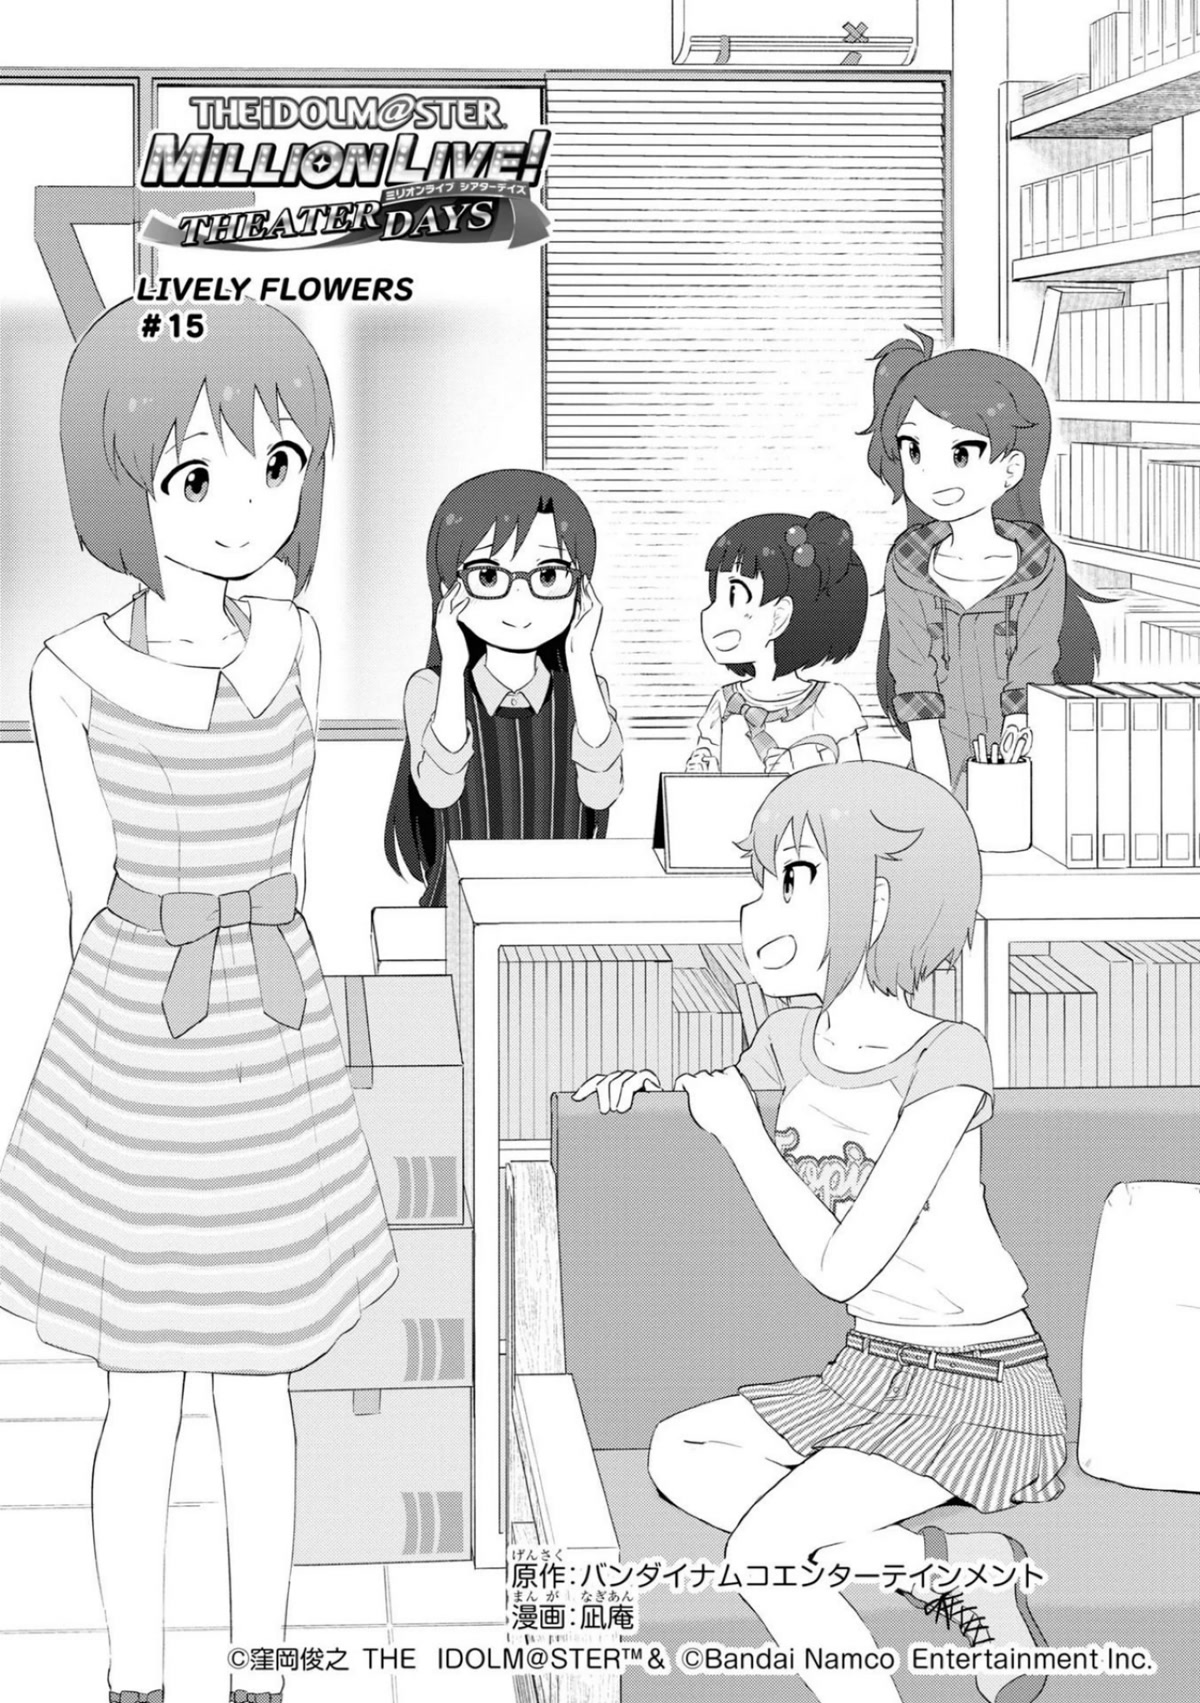 The Idolm@ster Million Live! Theater Days - Lively Flowers Chapter 15 #1